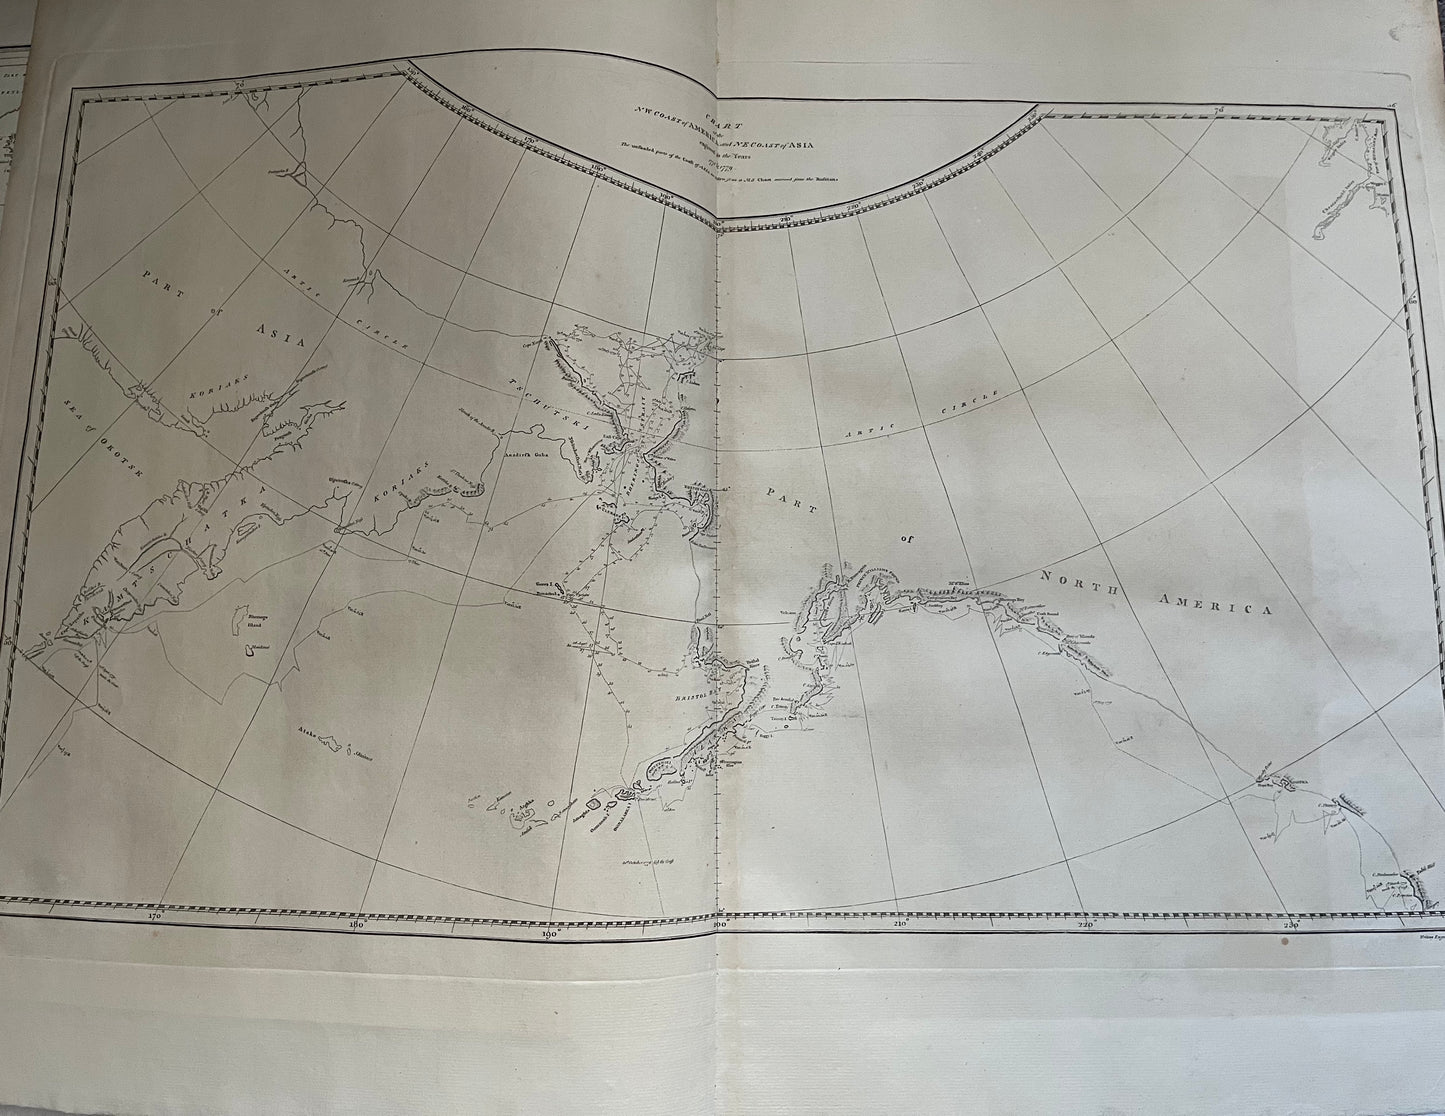 A Voyage to the Pacific Ocean Undertaken by the Command of his Majesty for Making Discoveries in the Northern Hemisphere - James Cook - Atlas Volume - Only - 1784 -  Complete (63 of 63 plates)